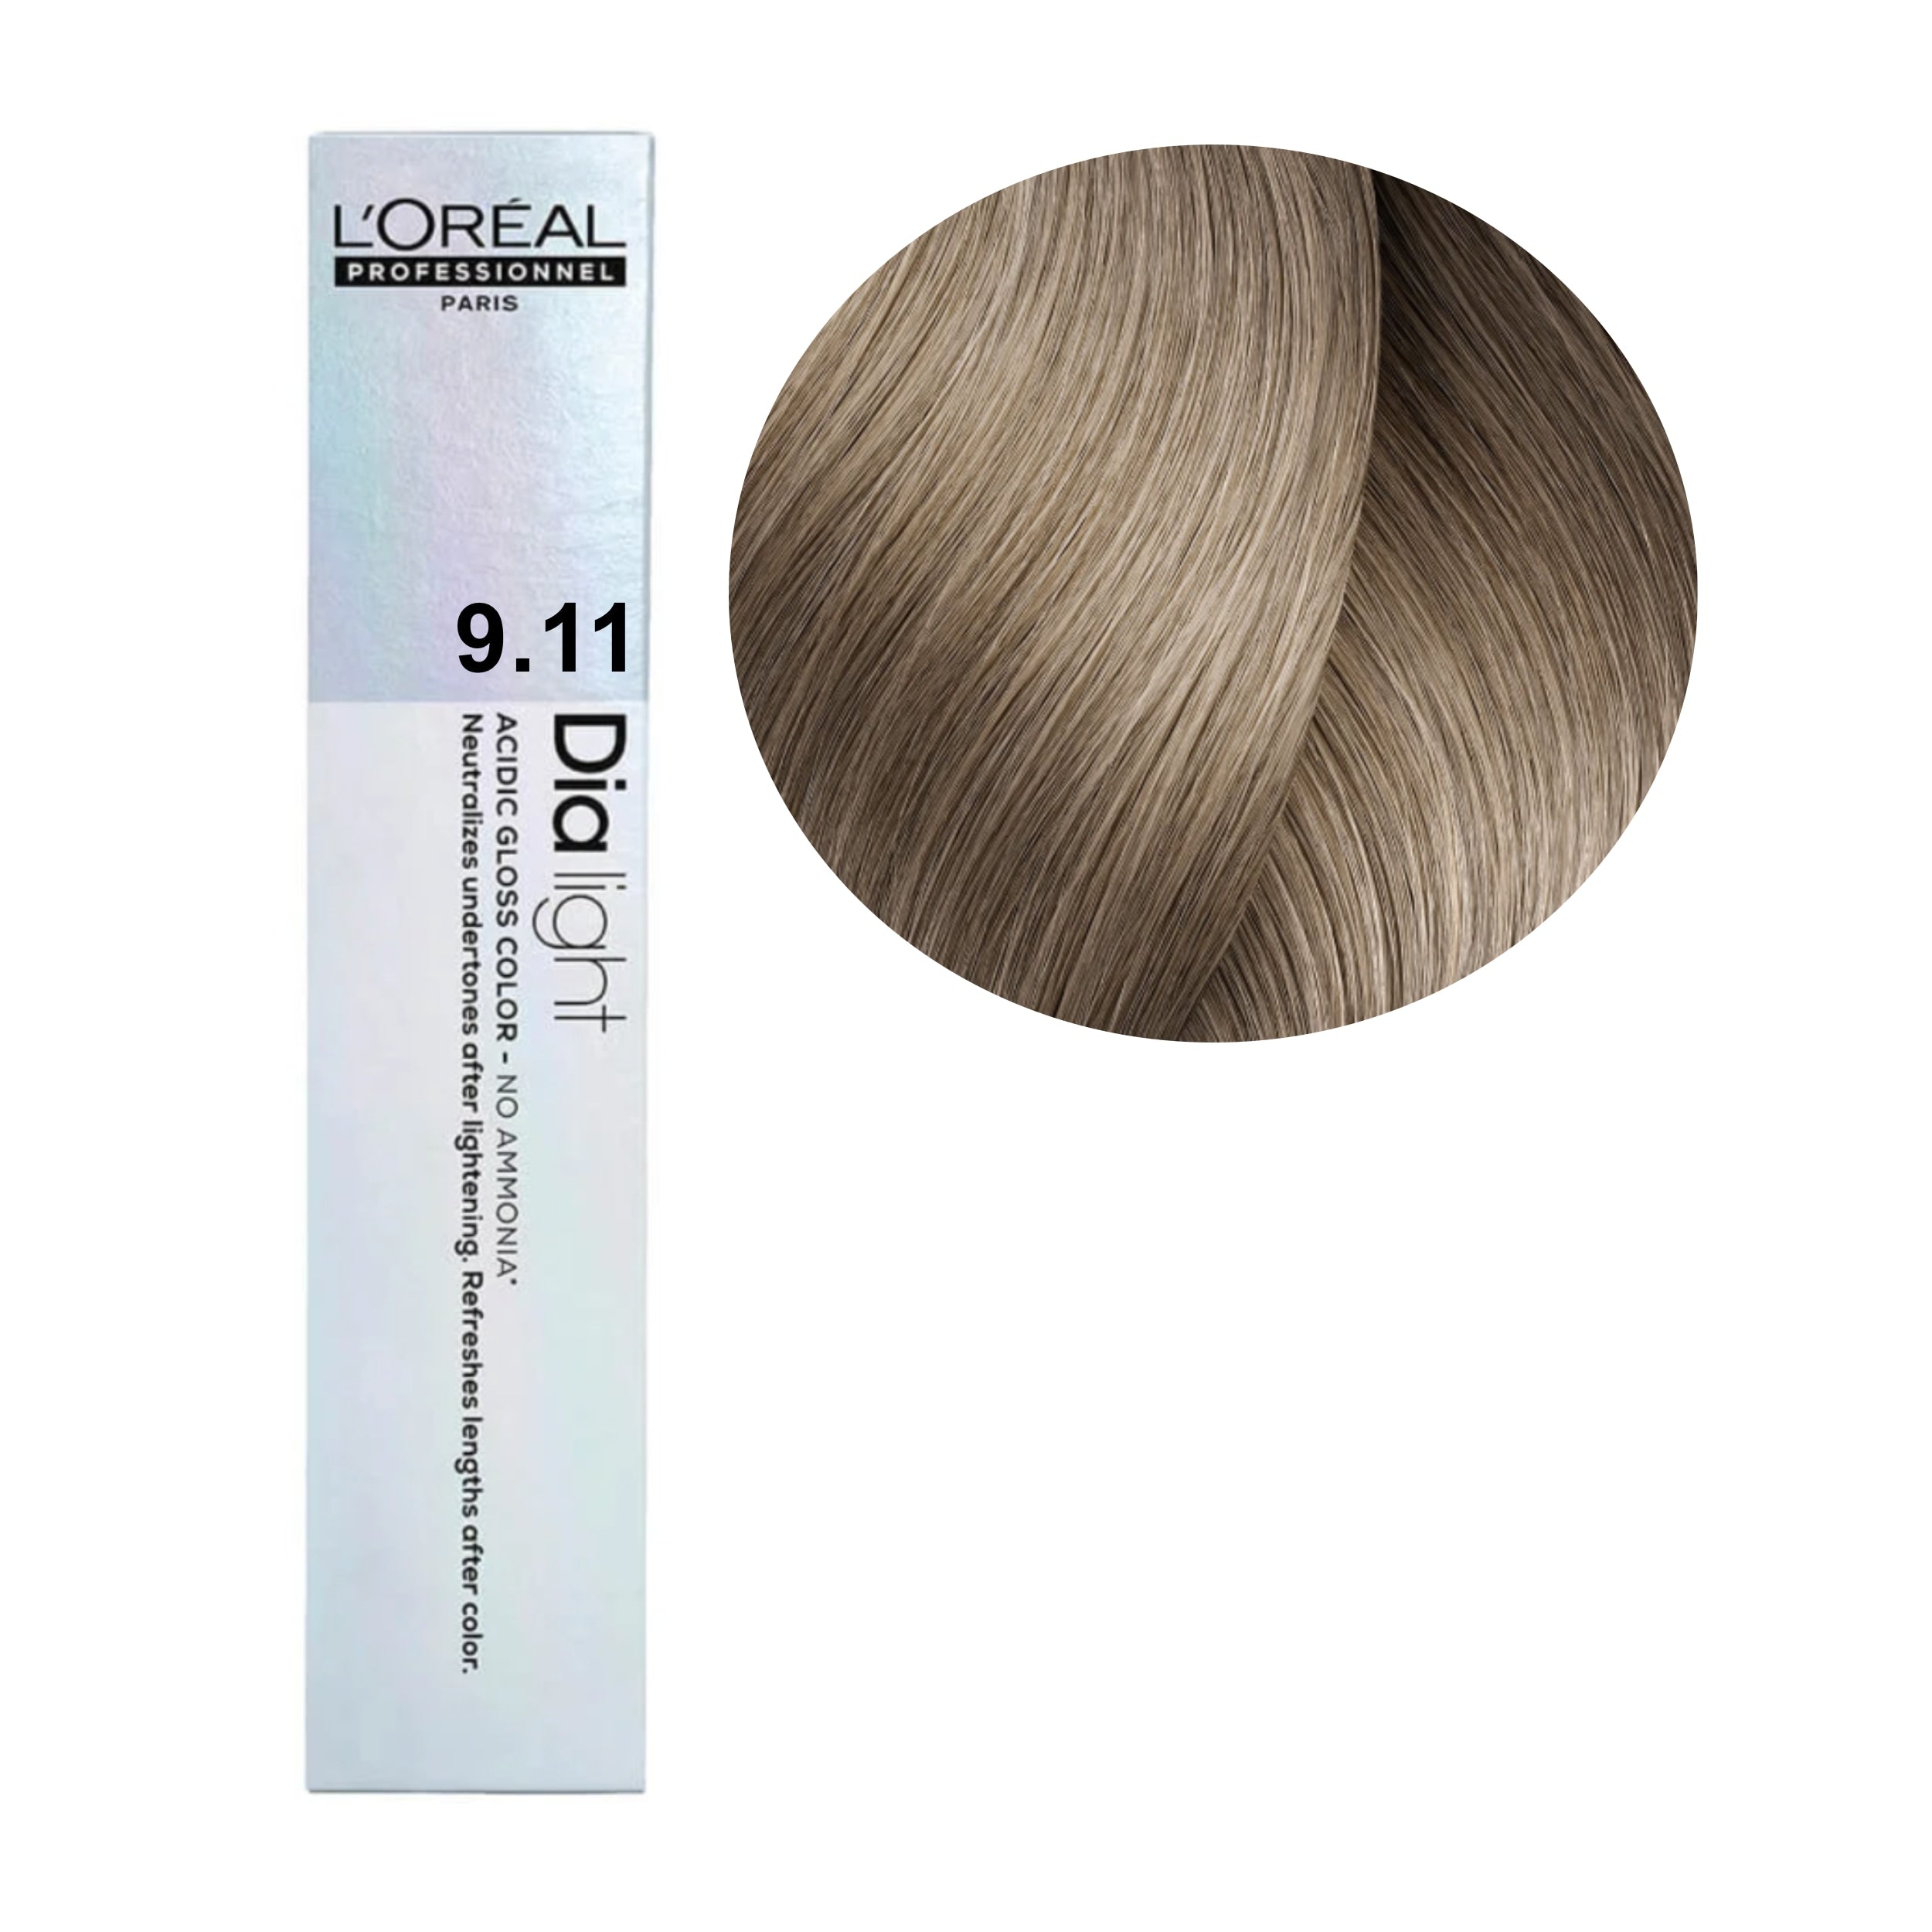 a tube of hair color with a white background